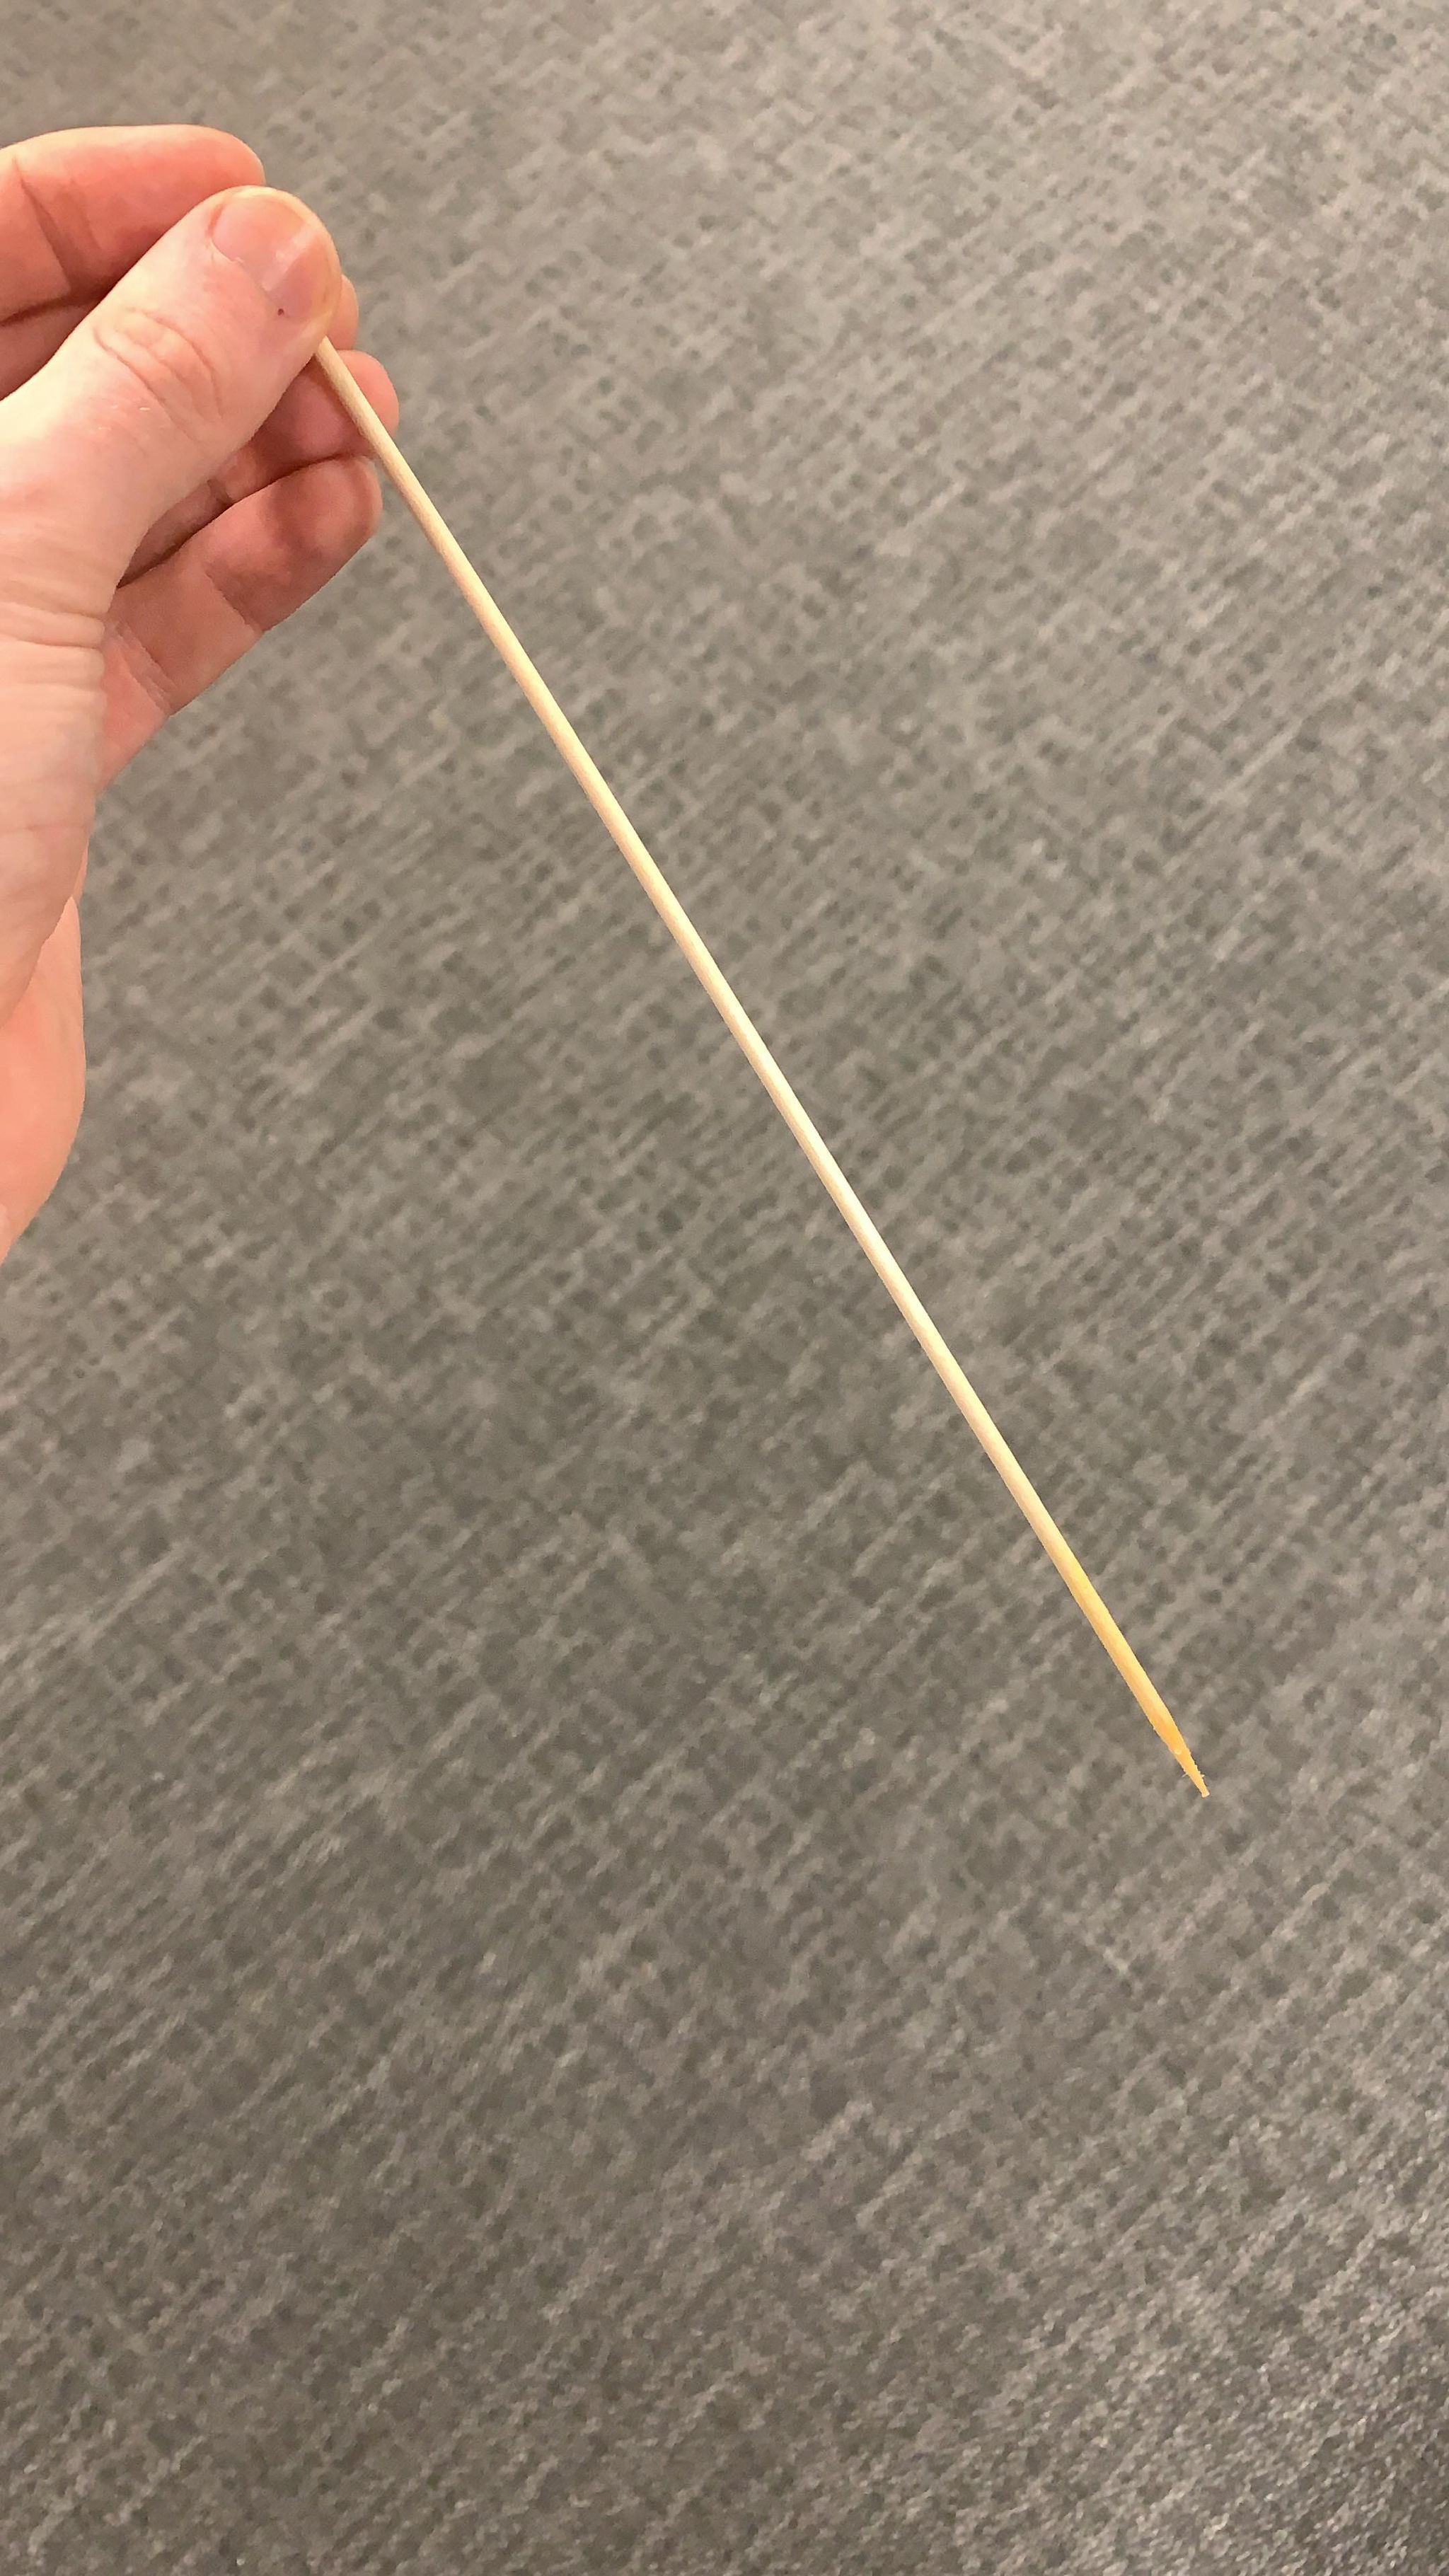 The pointed stick you are given to eat your chips with